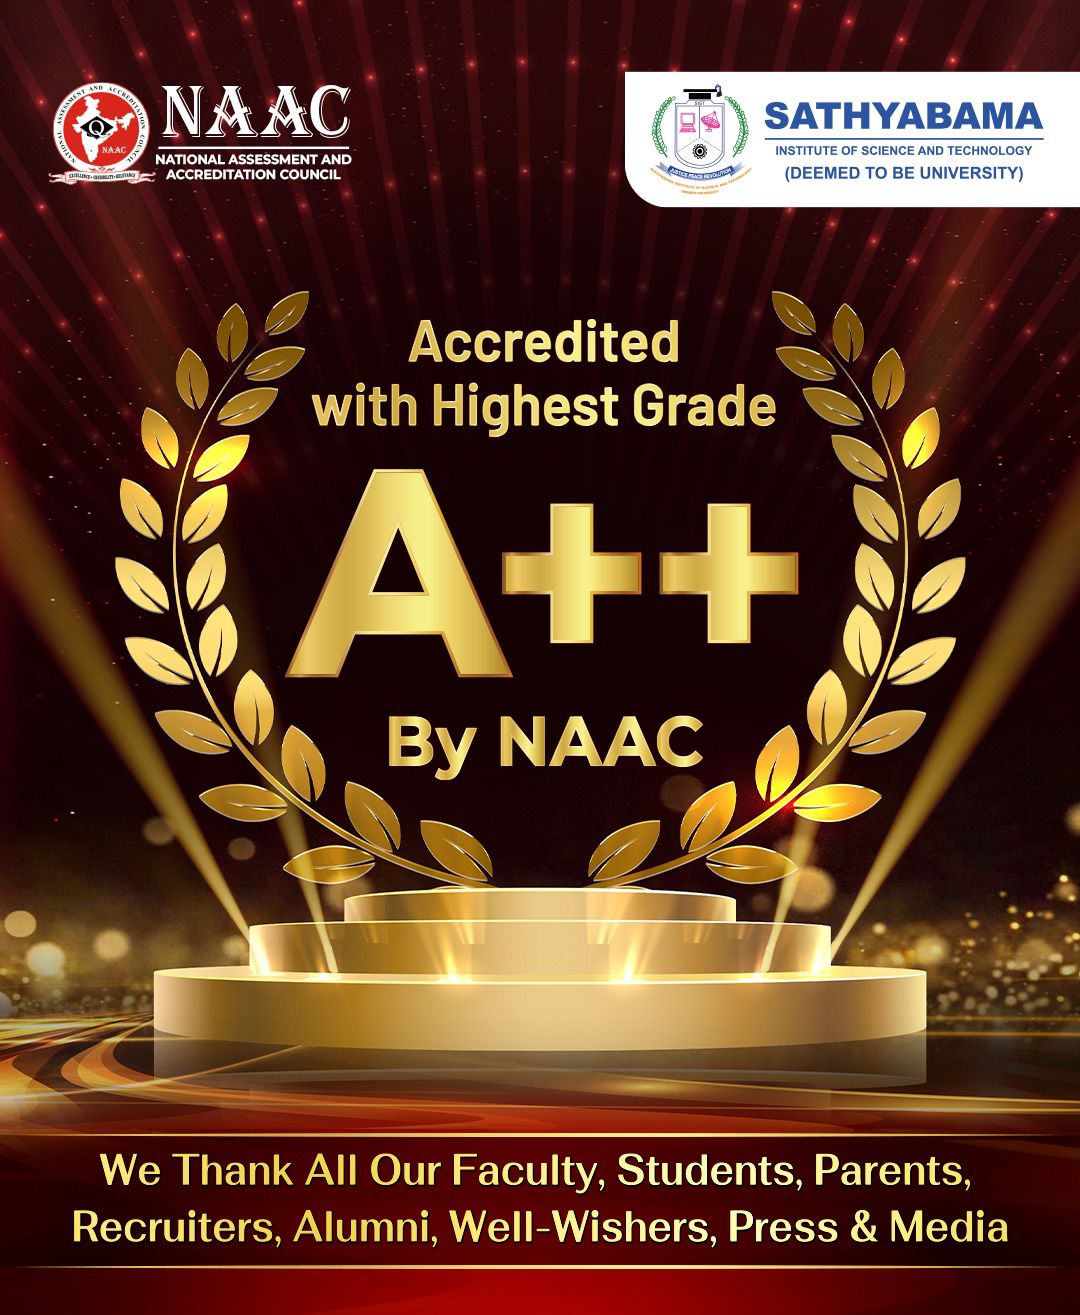 We are delighted to share that SATHYABAMA is accredited with Highest Grade A++ by NAAC. Sathyabama Institute of Science and T